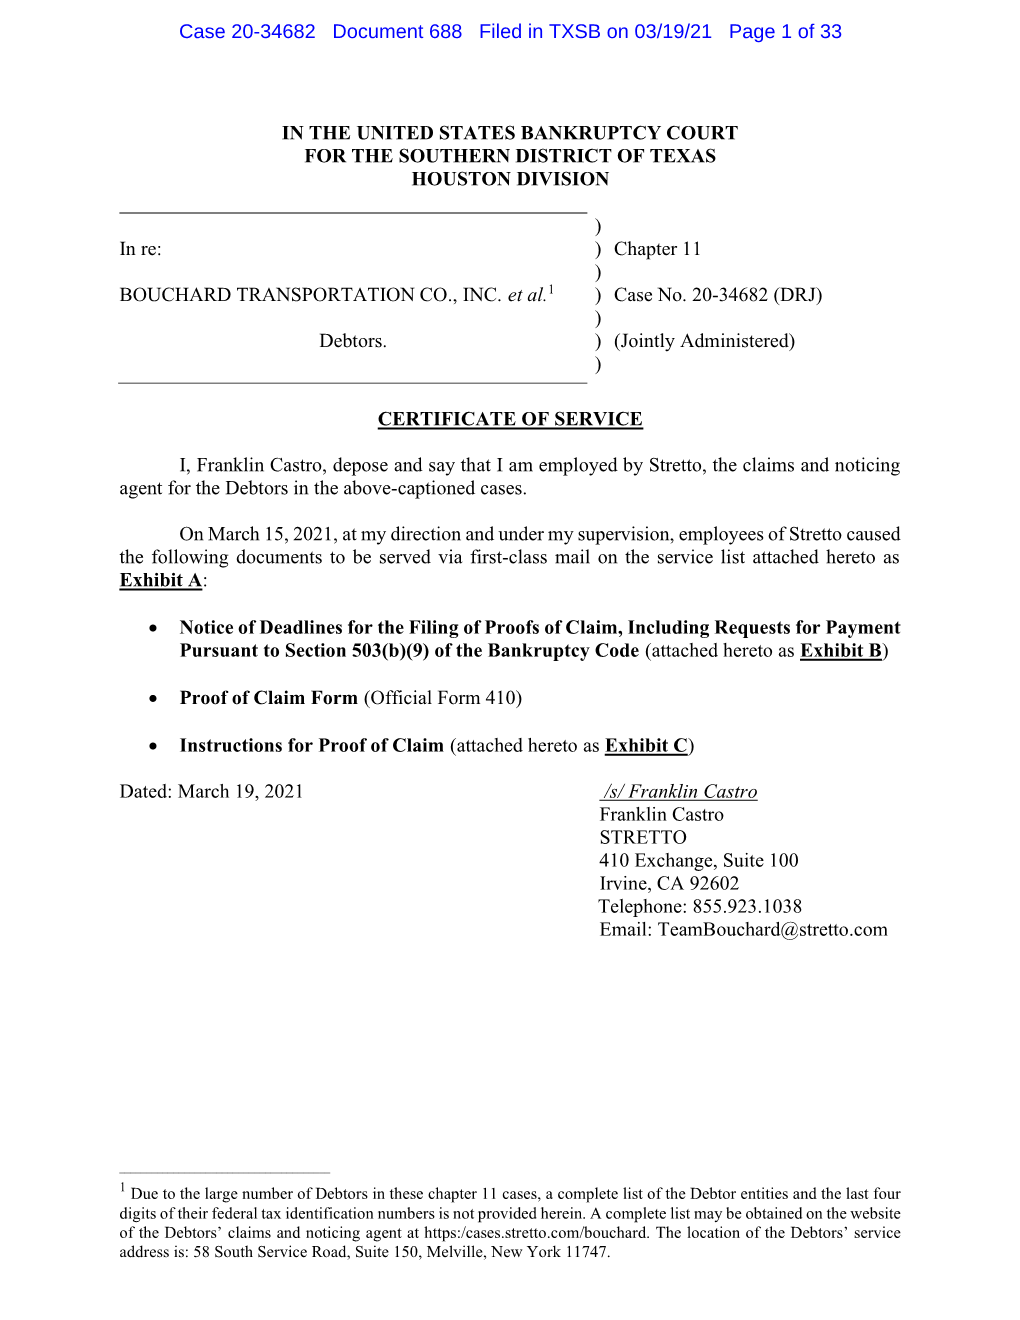 Case 20-34682 Document 688 Filed in TXSB on 03/19/21 Page 1 of 33